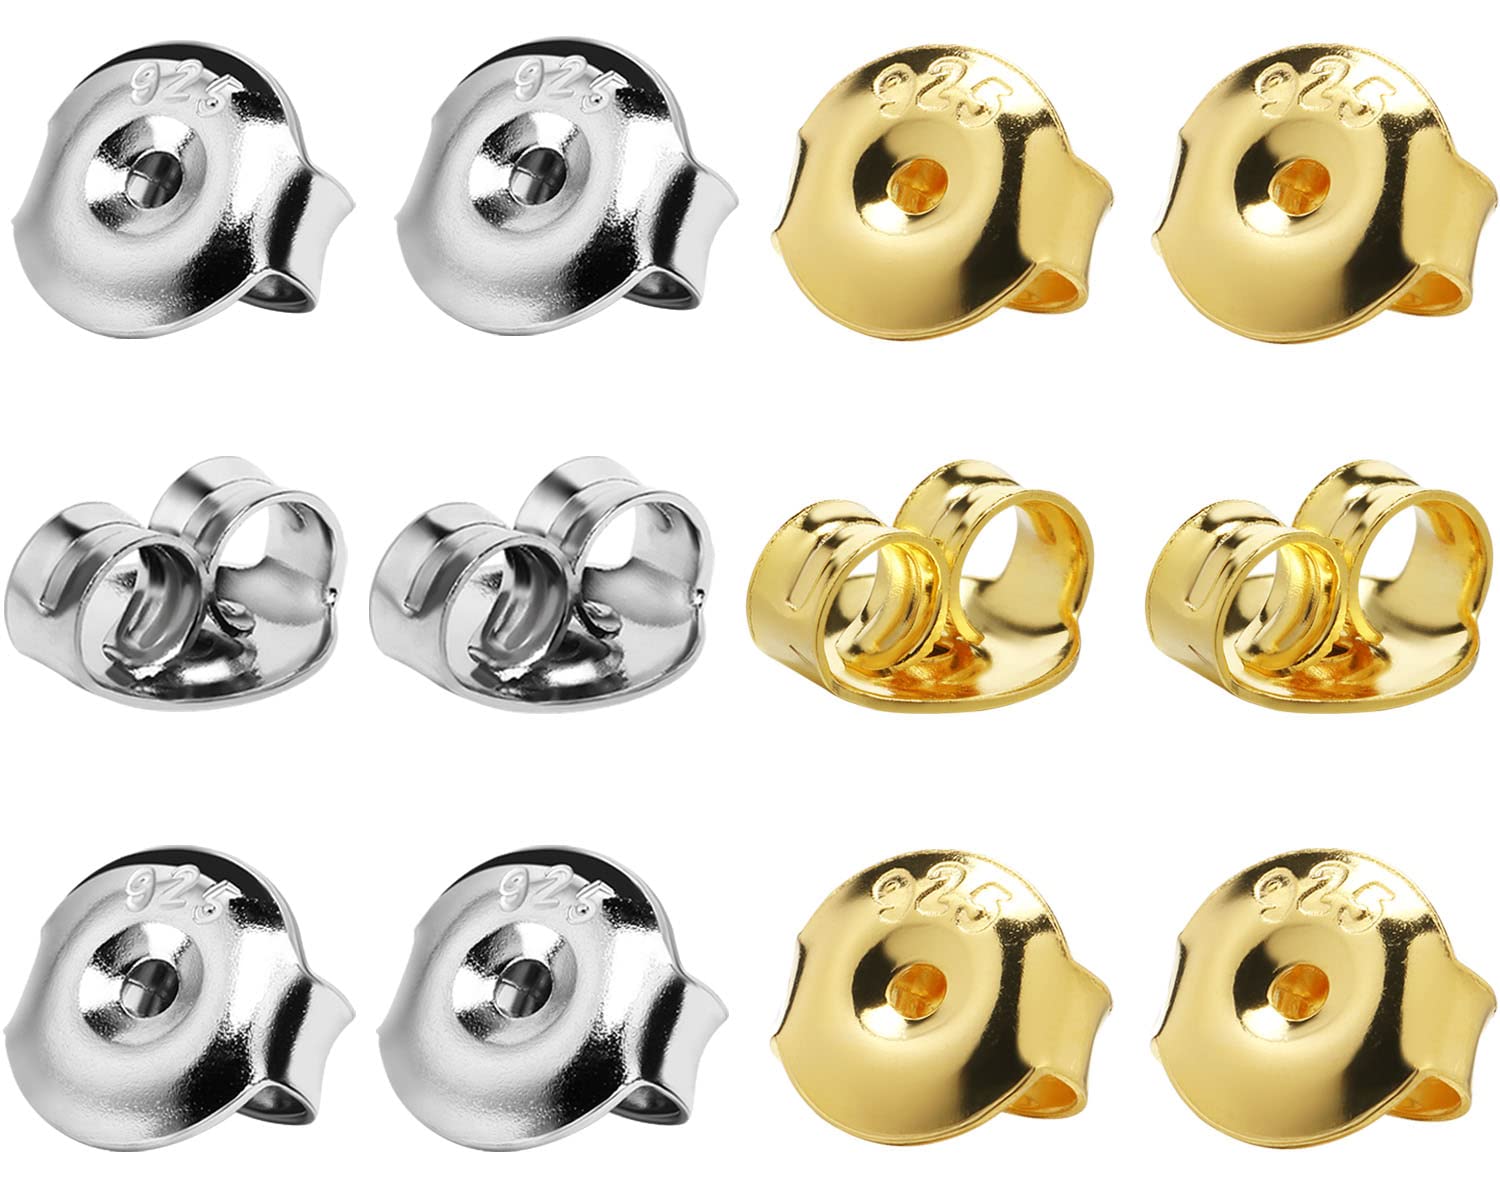 DELECOE 14K Gold Plated Earring Backs Replacements, 925 Sterling Silver  Hypoallergenic Secure Gold Earring Backs Locking